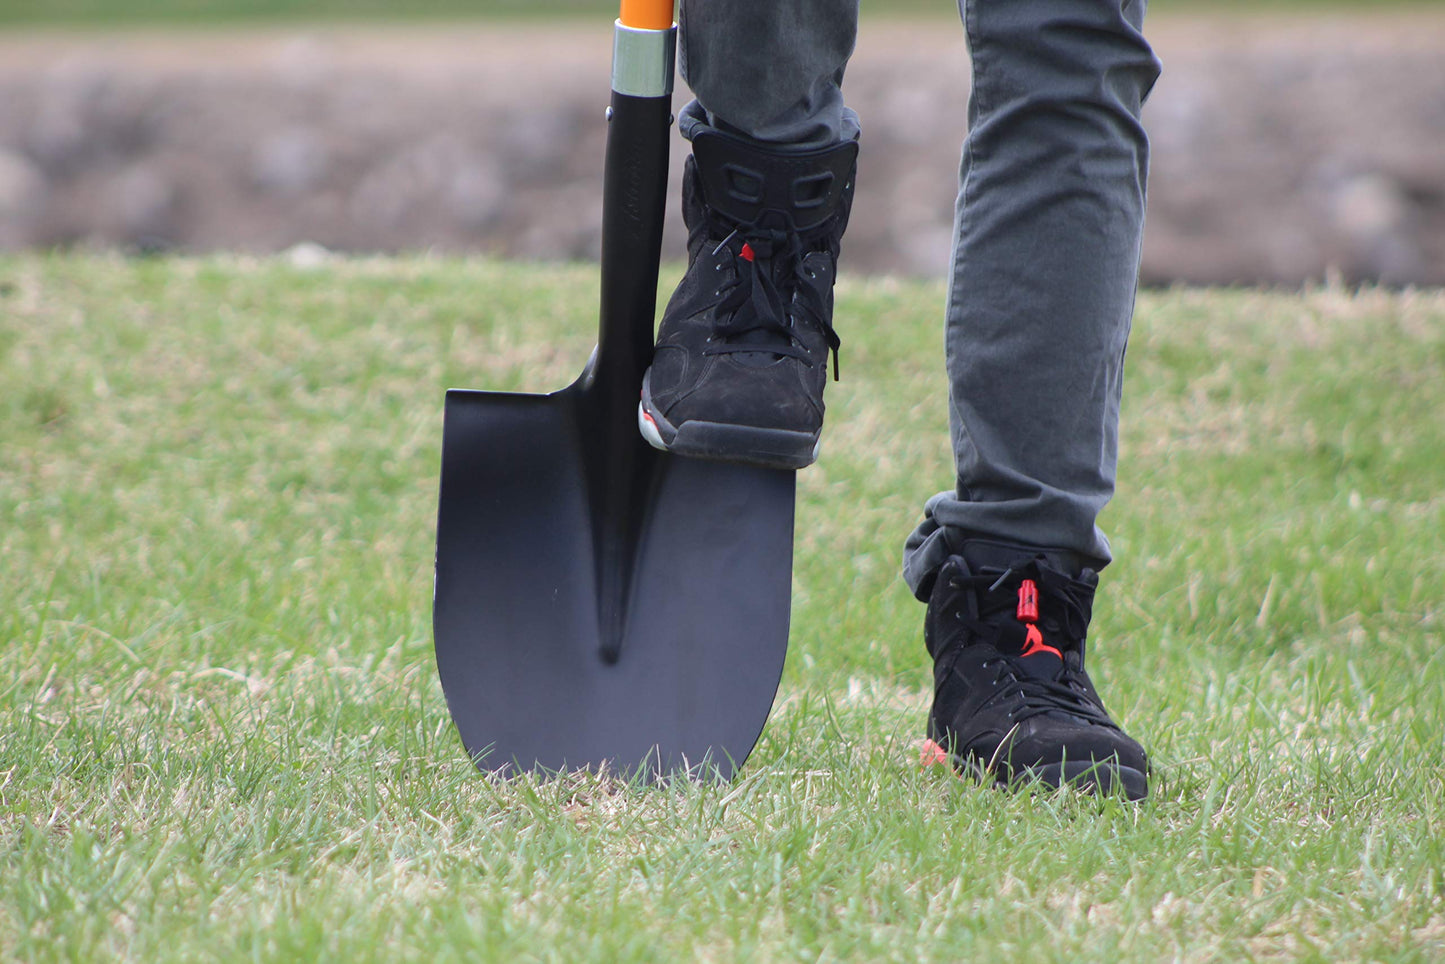 Ashman Heavy-Duty Digging Shovel (6 Pack) 41-Inch with Trenching Blade and Comfortable Handle - Ideal for Garden, Landscaping, Construction, and Masonry - Perfect for Digging Soil, Dirt, and Gravel.